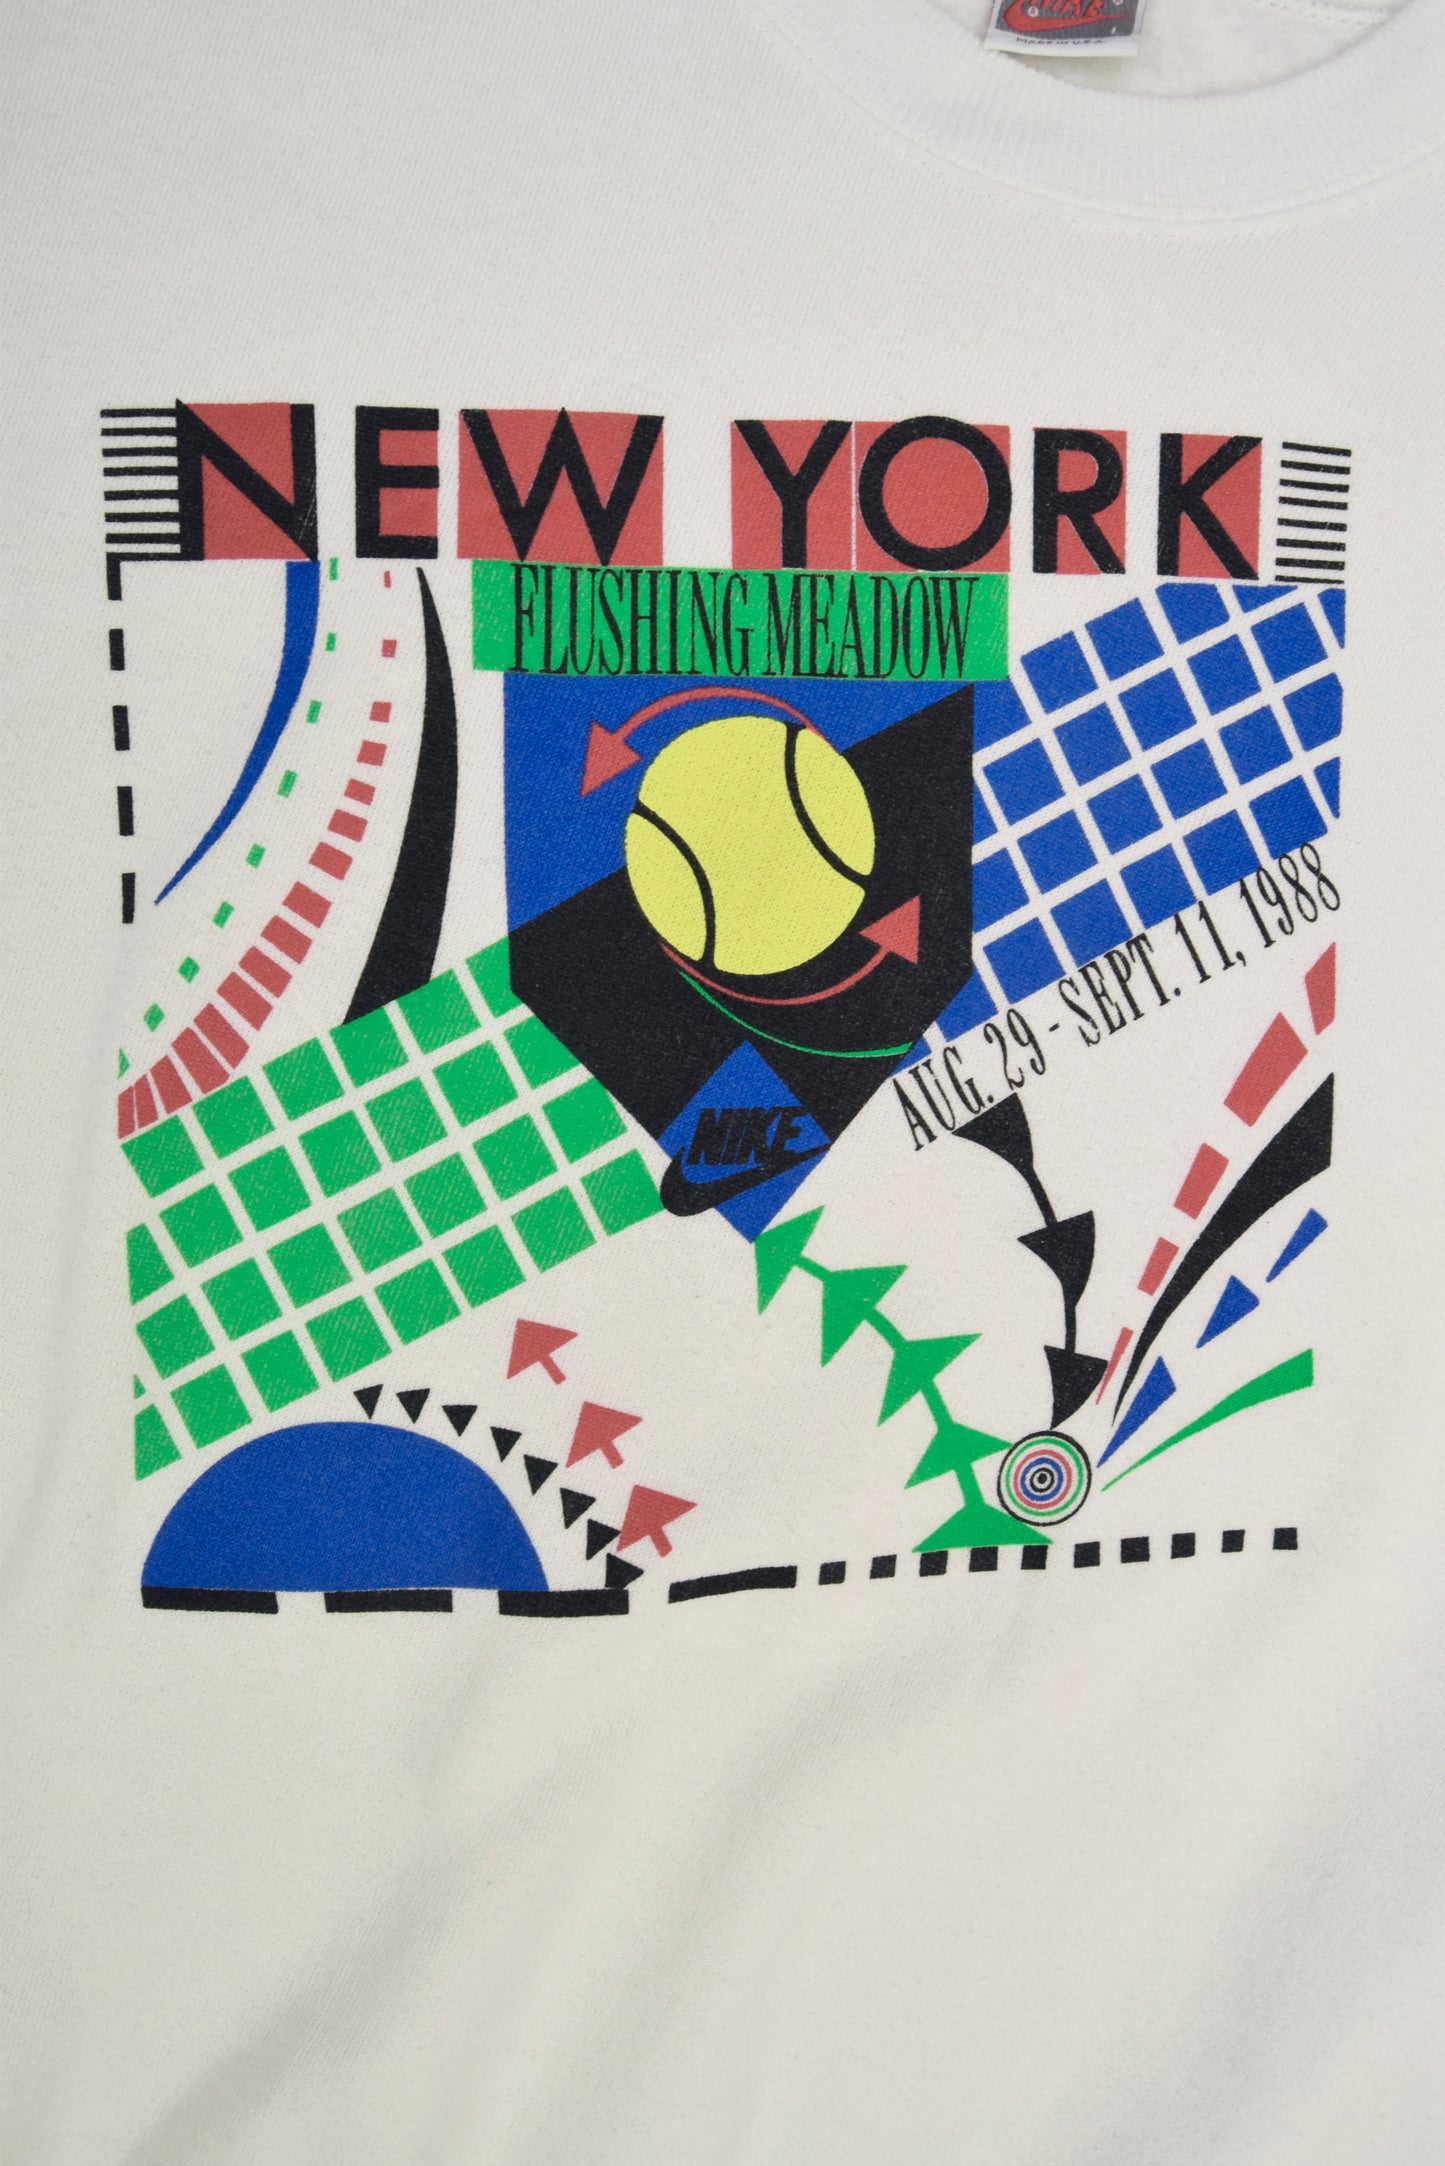 Nike Tennis US Open Flushing Meadow Aug 29 - Sept 11 1988 Sweatshirt Made in USA Memphis Design Aesthetic White Size L Silver Tag